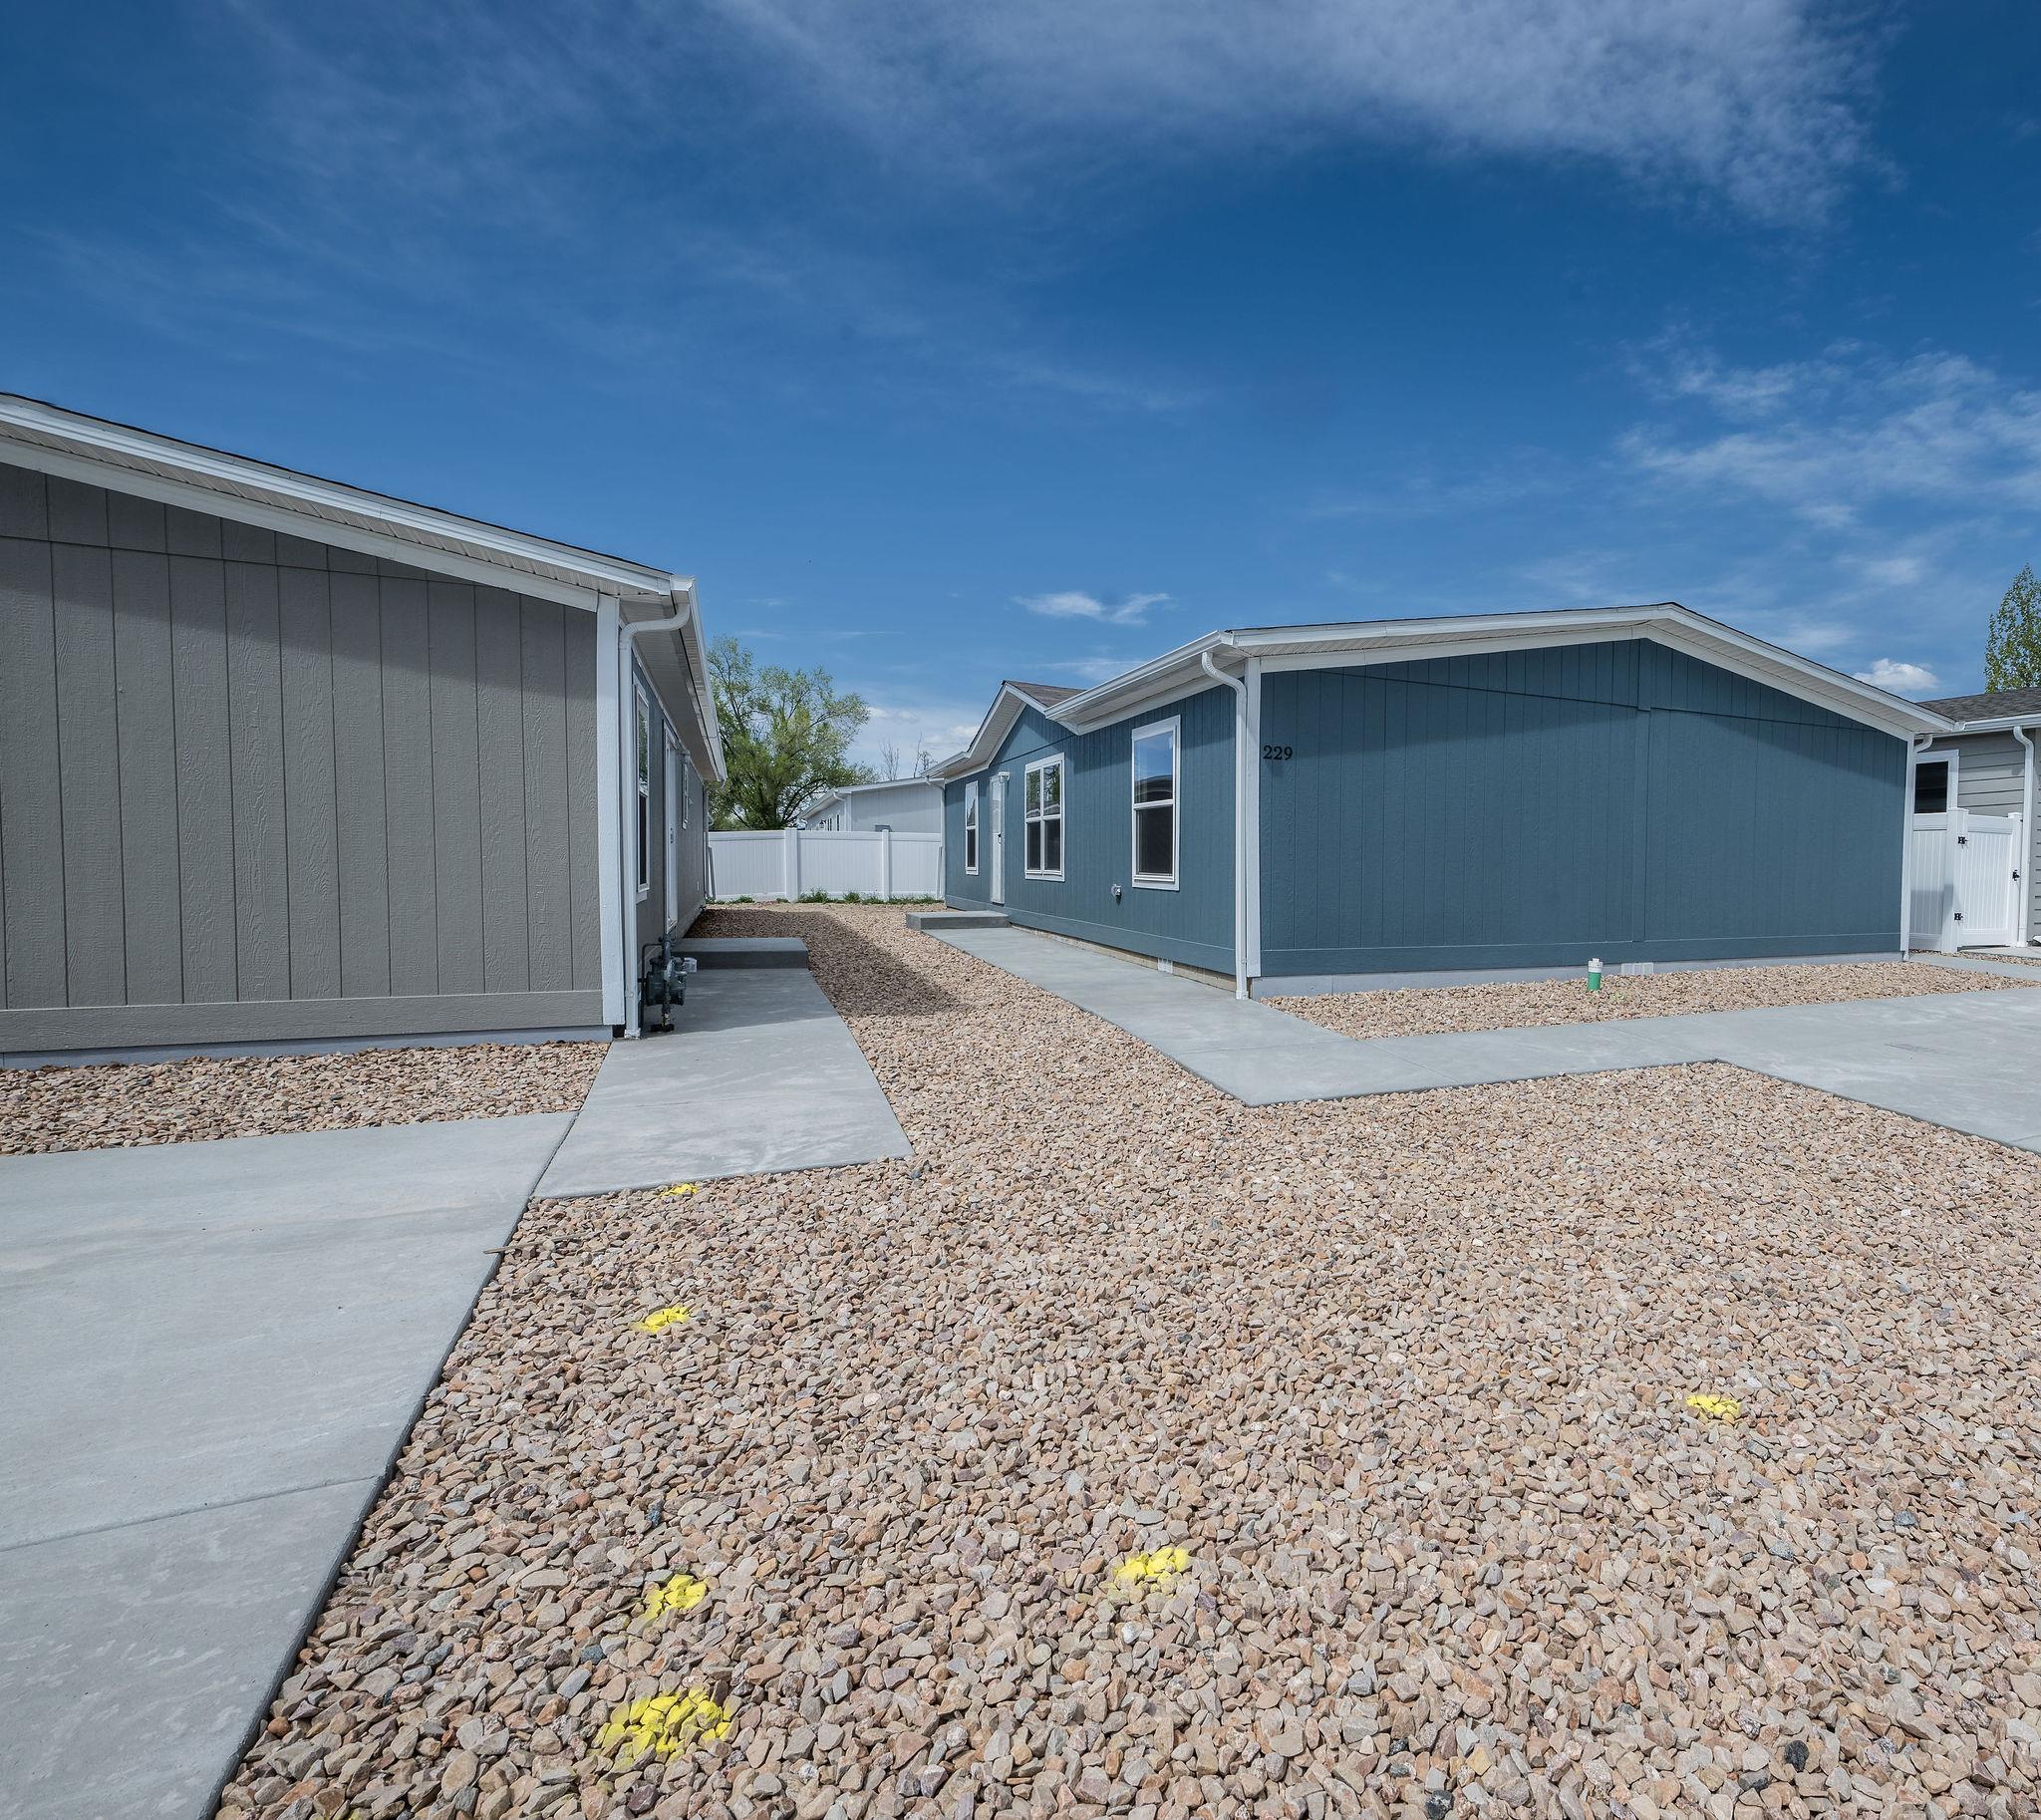 Affordable Fruita rancher with 3 bedrooms, 2 bathrooms and a great open floorplan. This brand-new home from Clayton Homes has great access to hiking and biking trails and has a low maintenance yard to allow extra time to enjoy it all! Come take a look for yourself! All information is subject to error.